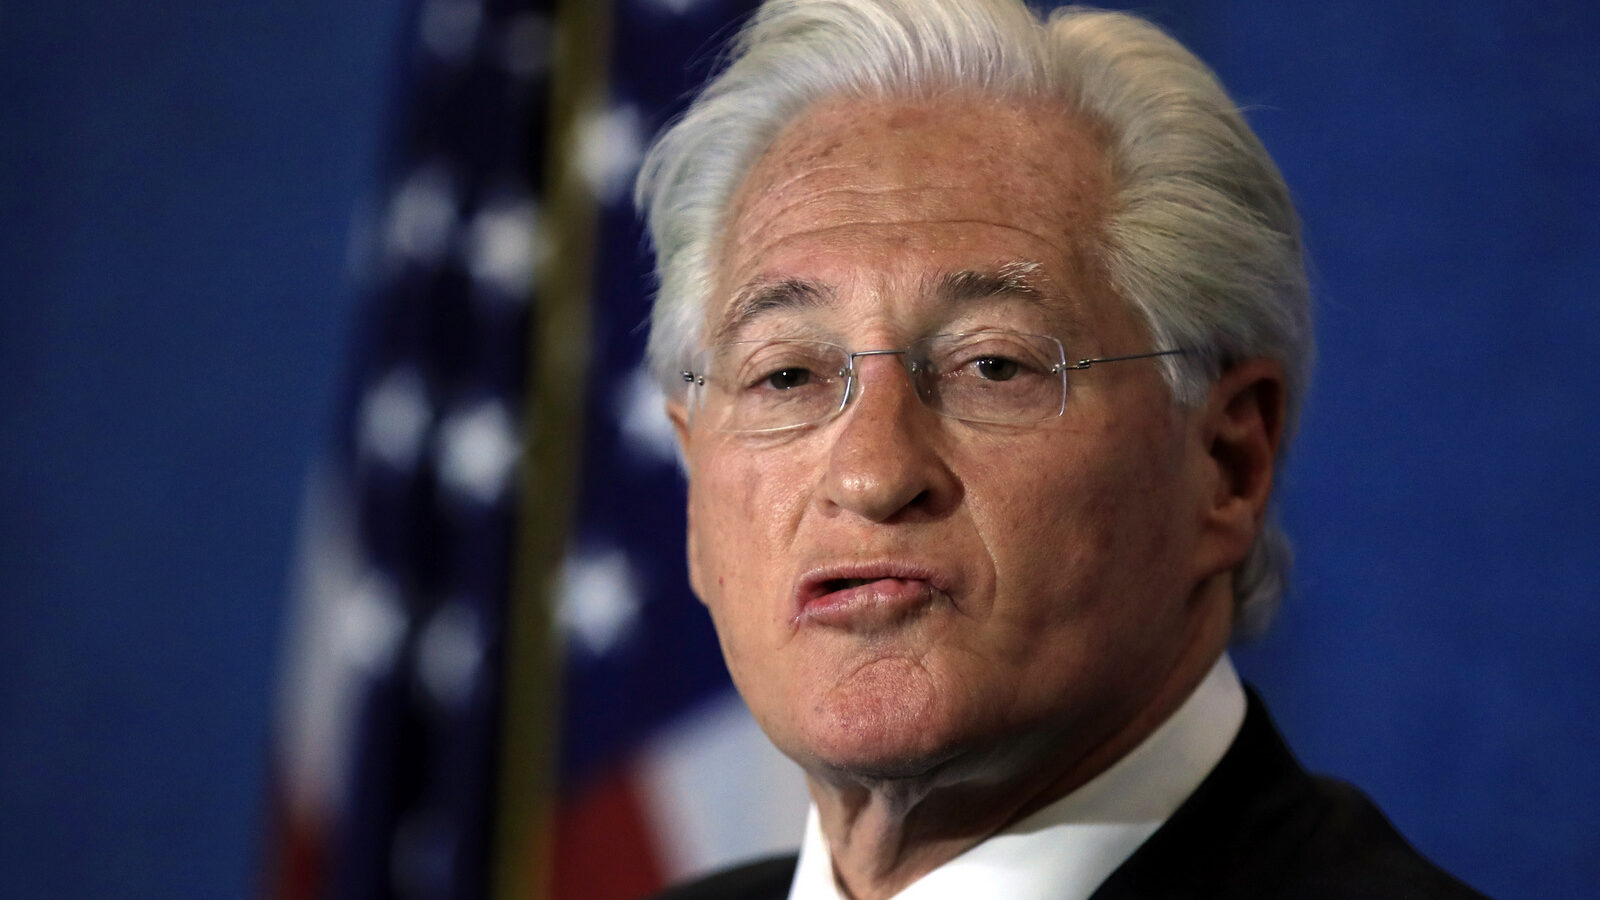 Marc Kasowitz personal attorney of President Donald Trump makes a statement at the National Press Club, following the testimony of former FBI Director James Comey in Washington, June 8, 2017. (AP/Manuel Balce Ceneta)